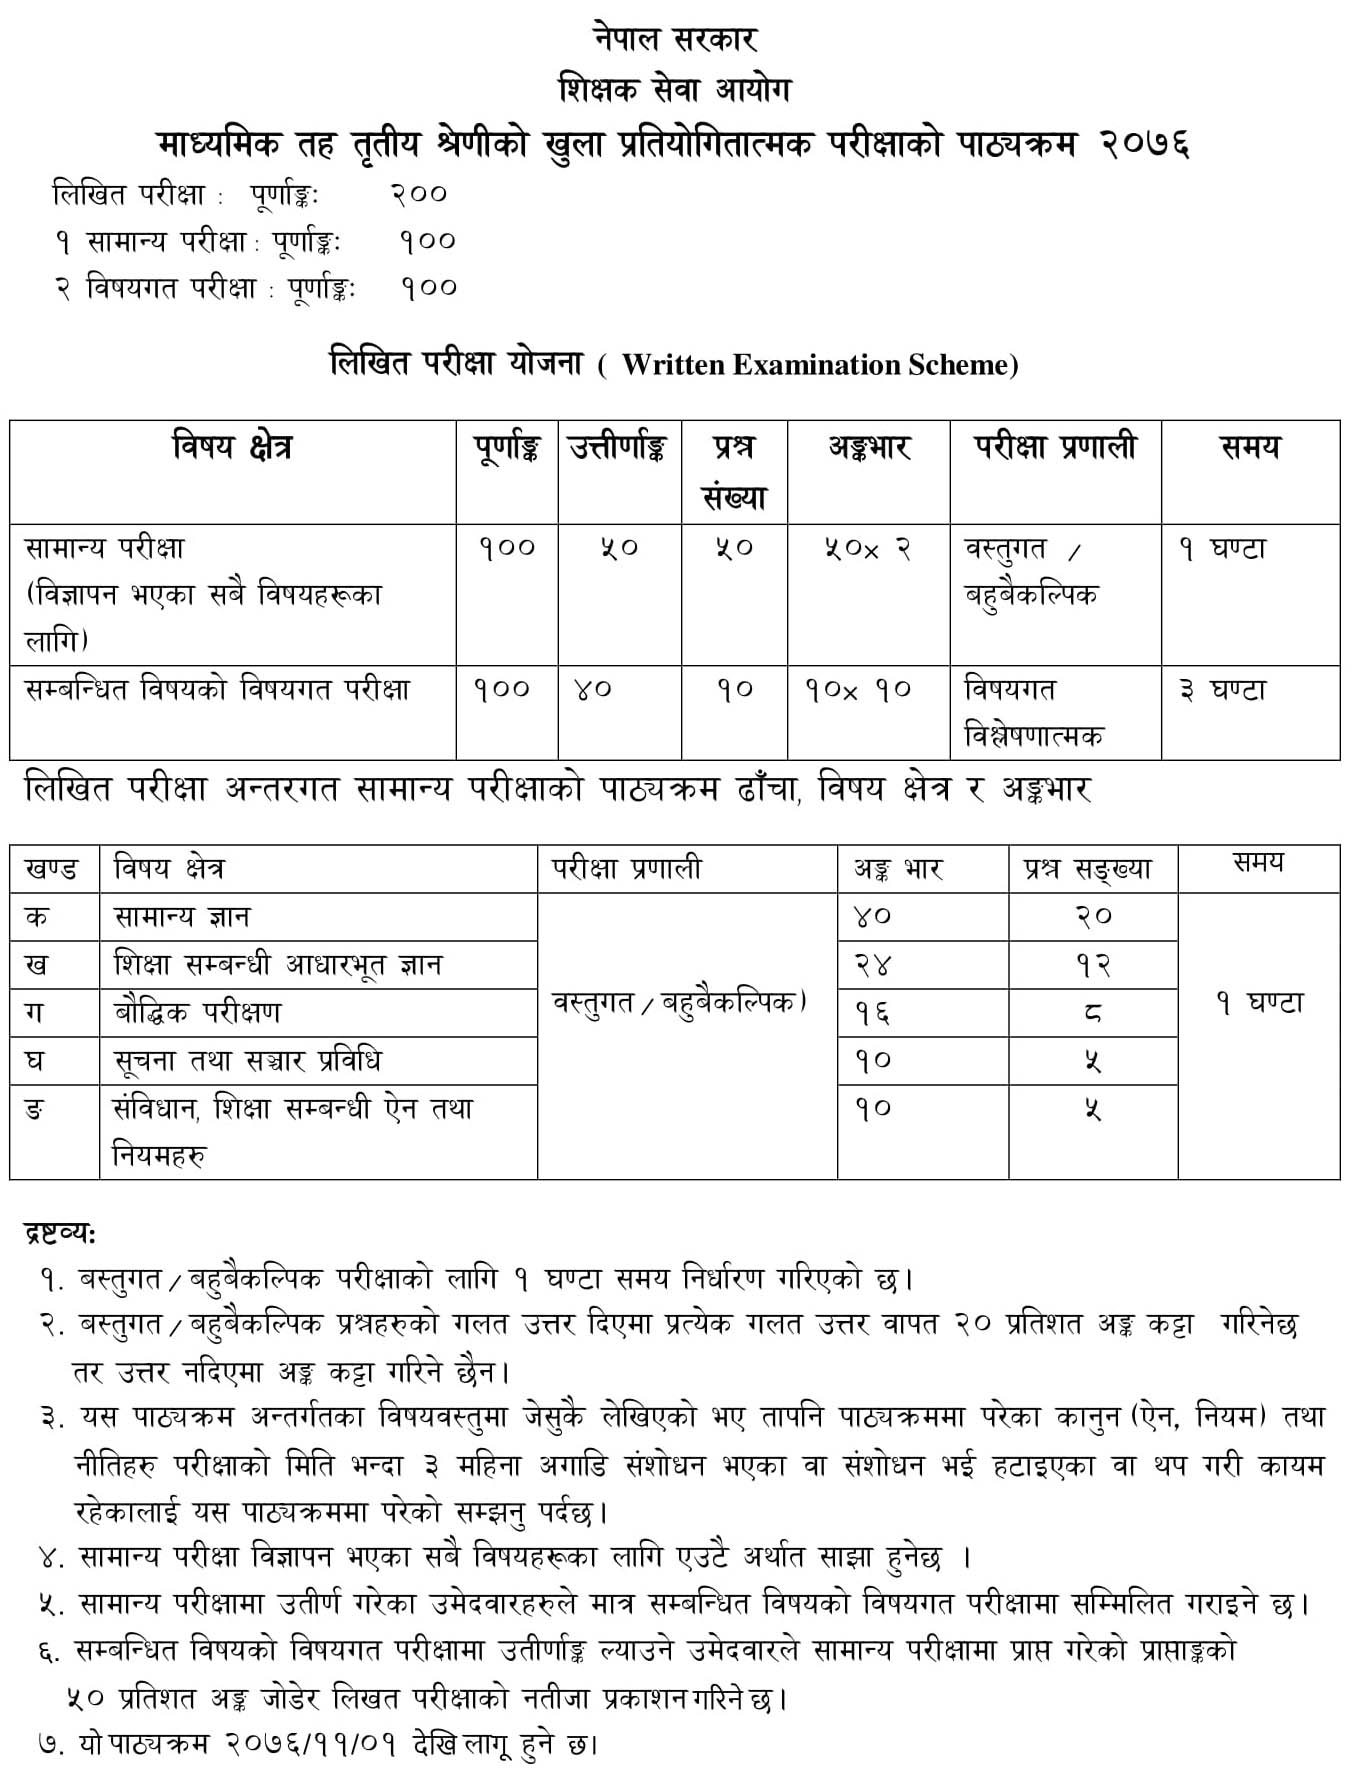 Shikshak Sewa Aayog Curriculum of Secondary Level Objective Question:- We will put the Shikshak Sewa Aayog secondary level objective question syllabus in this post.